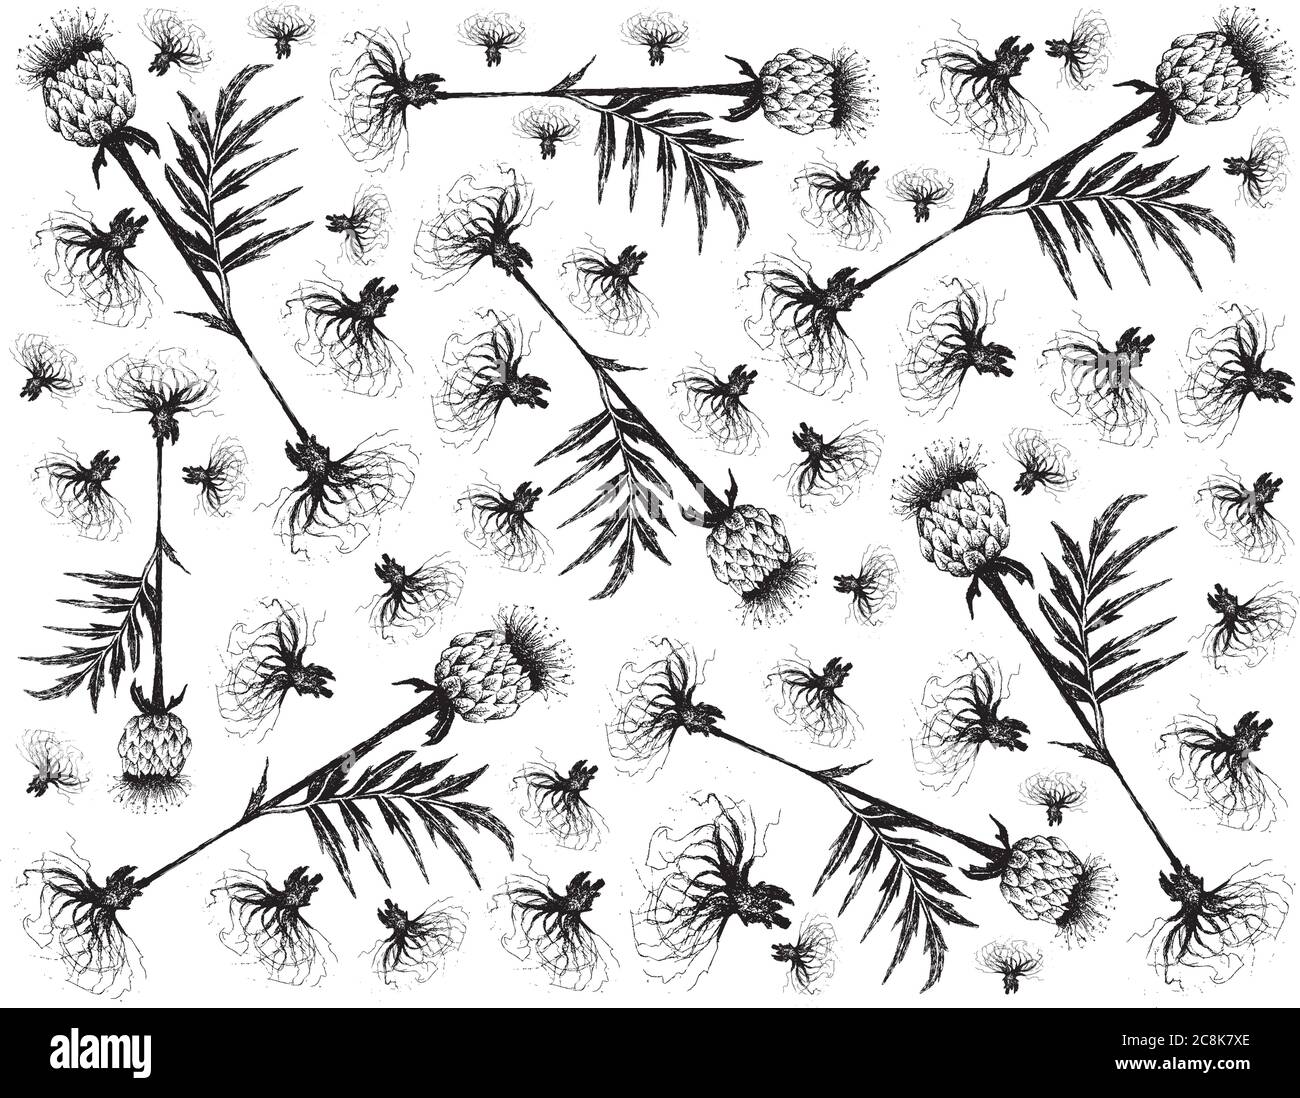 Herbal Flower and Plant, Hand Drawn Background of Rhaponticum Carthamoides or Maral Root Plant, Used in Alternative and Folk Medicine. Stock Vector